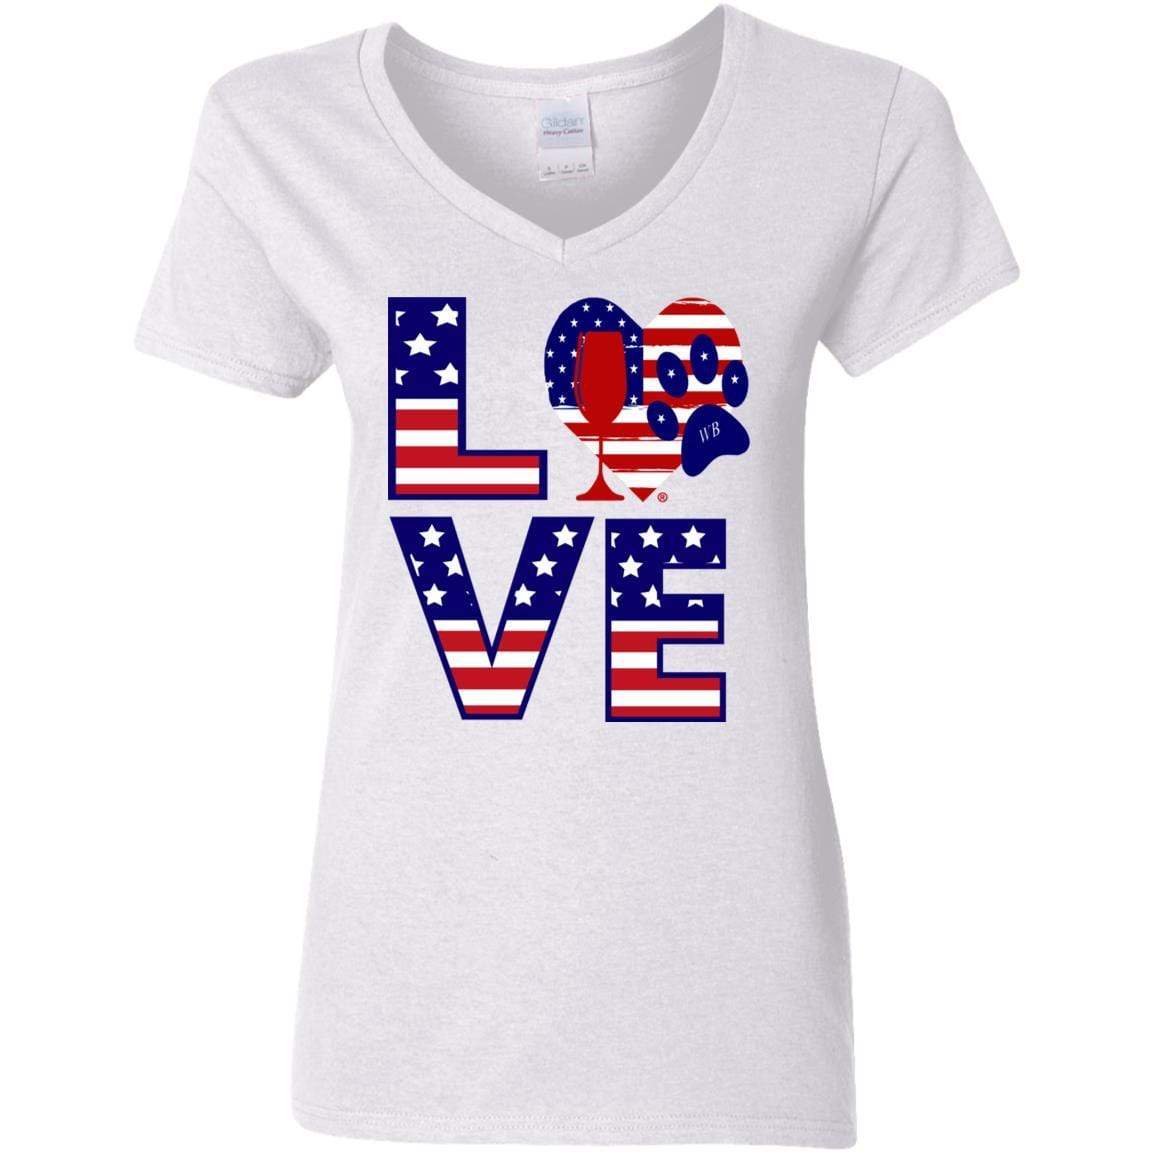 T-Shirts White / S Winey Bitches Co "American Love Paw" Ladies' 5.3 oz. V-Neck T-Shirt WineyBitchesCo